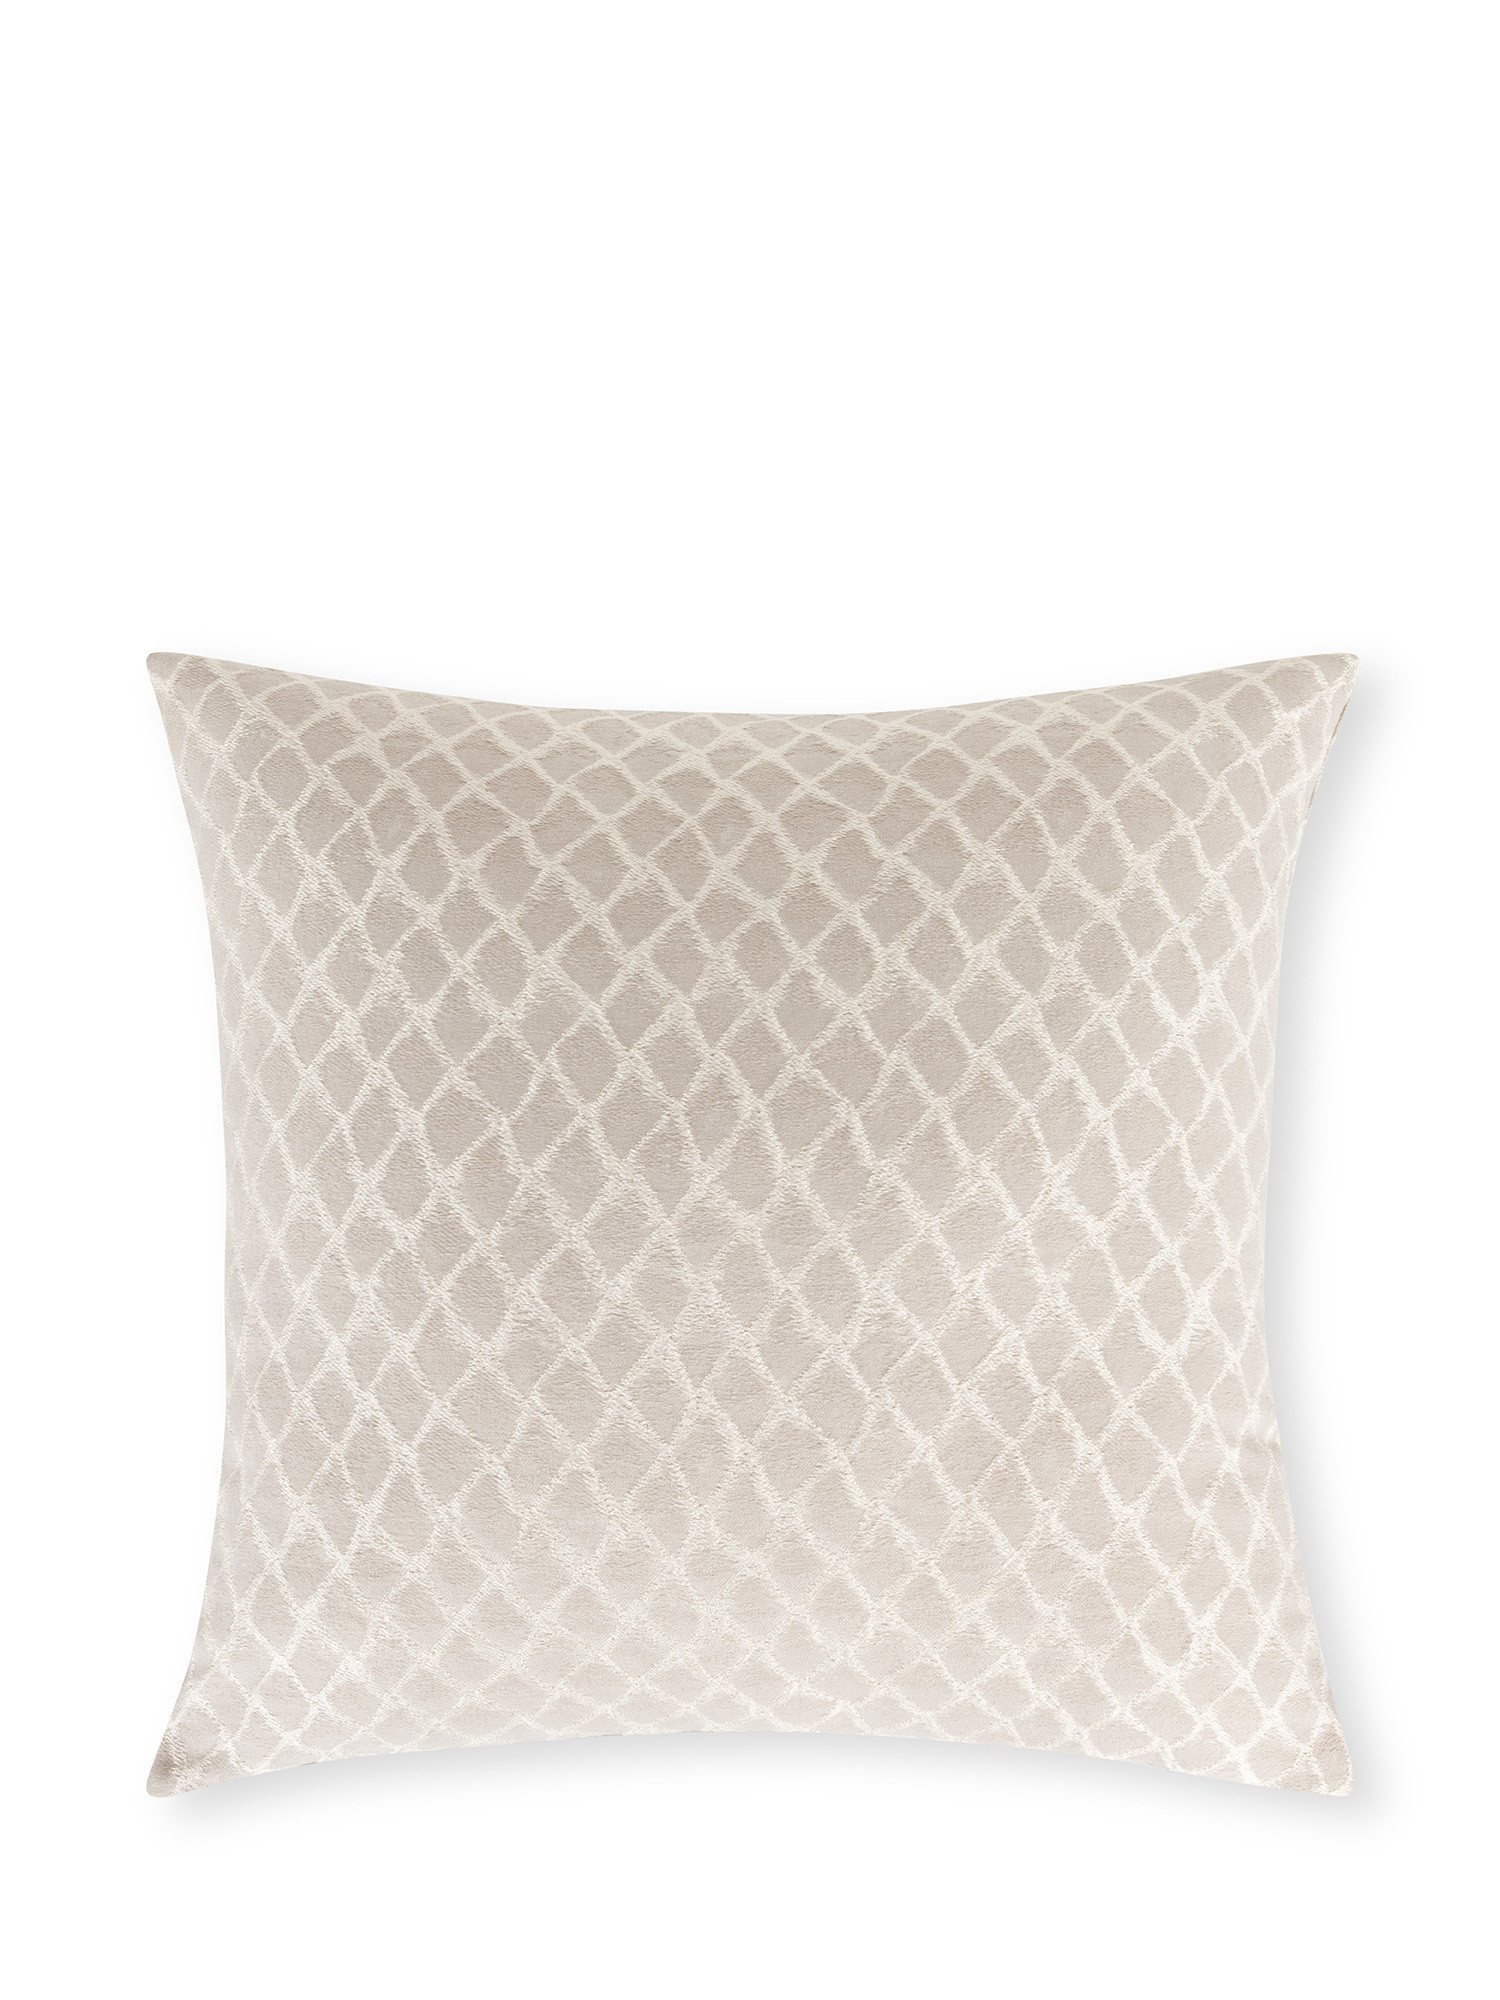 Cushion in jacquard fabric with geometric pattern 45x45 cm, Silver Grey, large image number 0